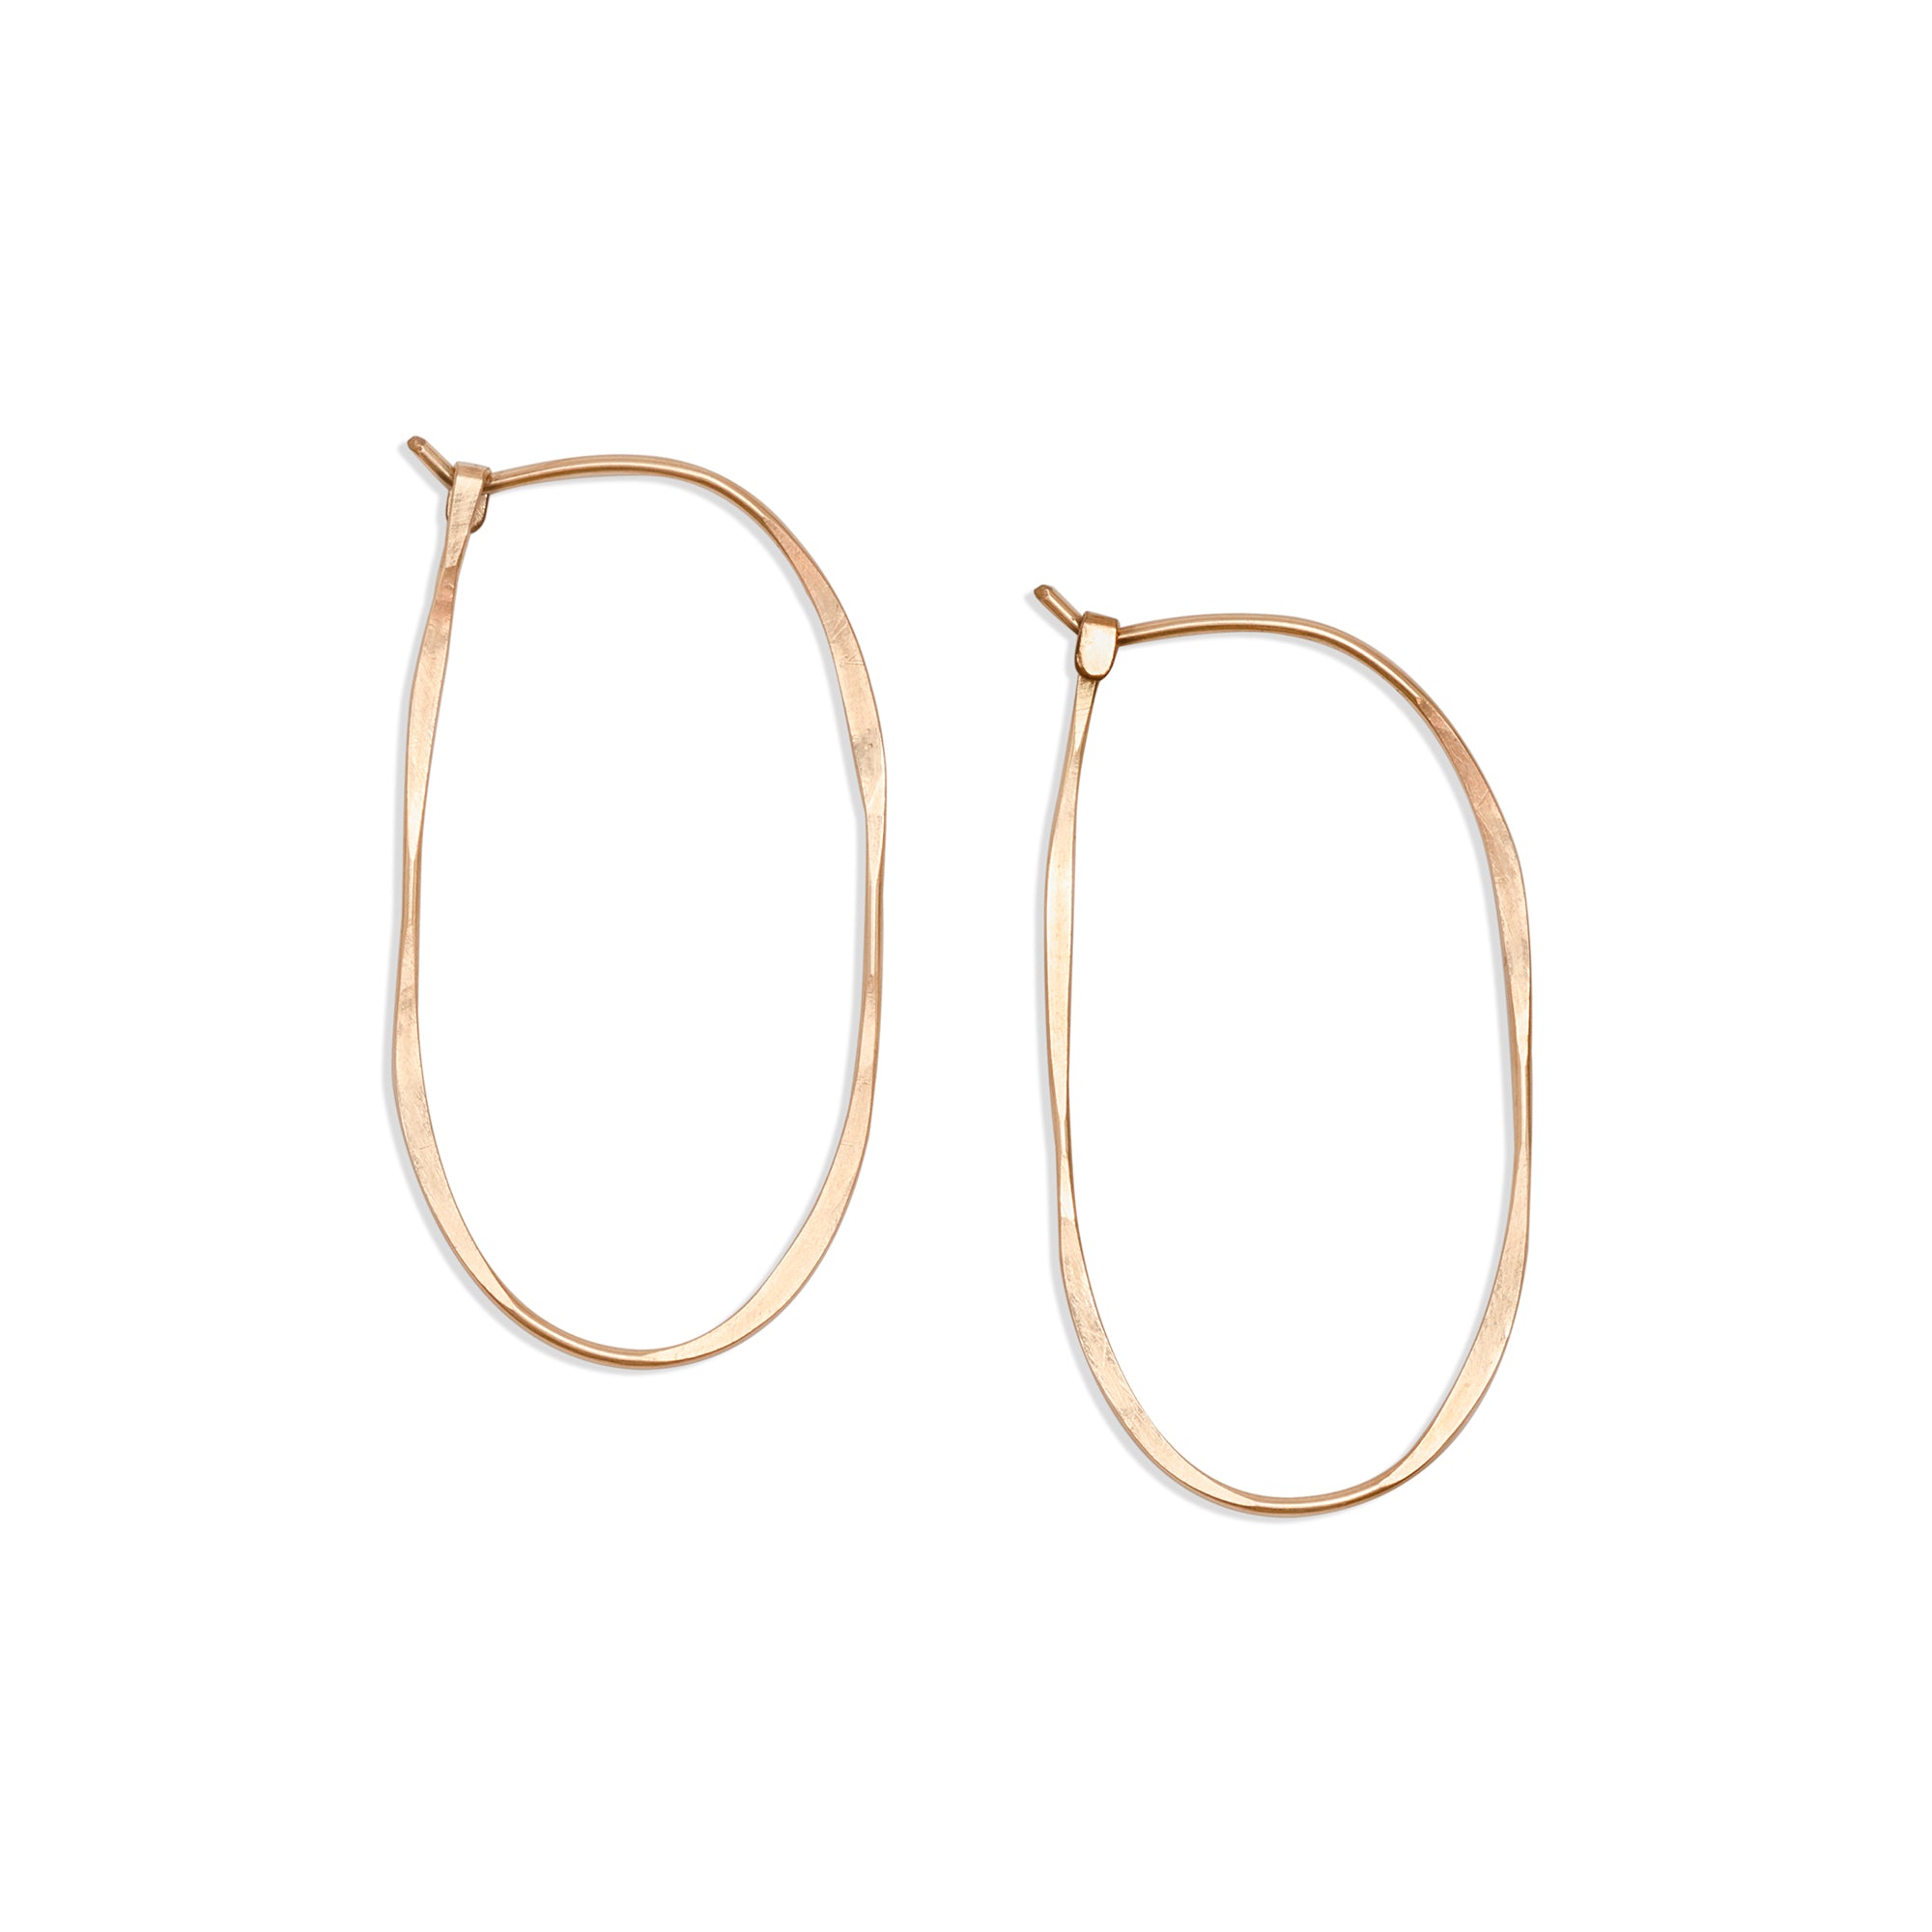 Elongated Oval Hoop, a handmade modern hoop earring made from hammered 14k gold wire finished with a hook closure.